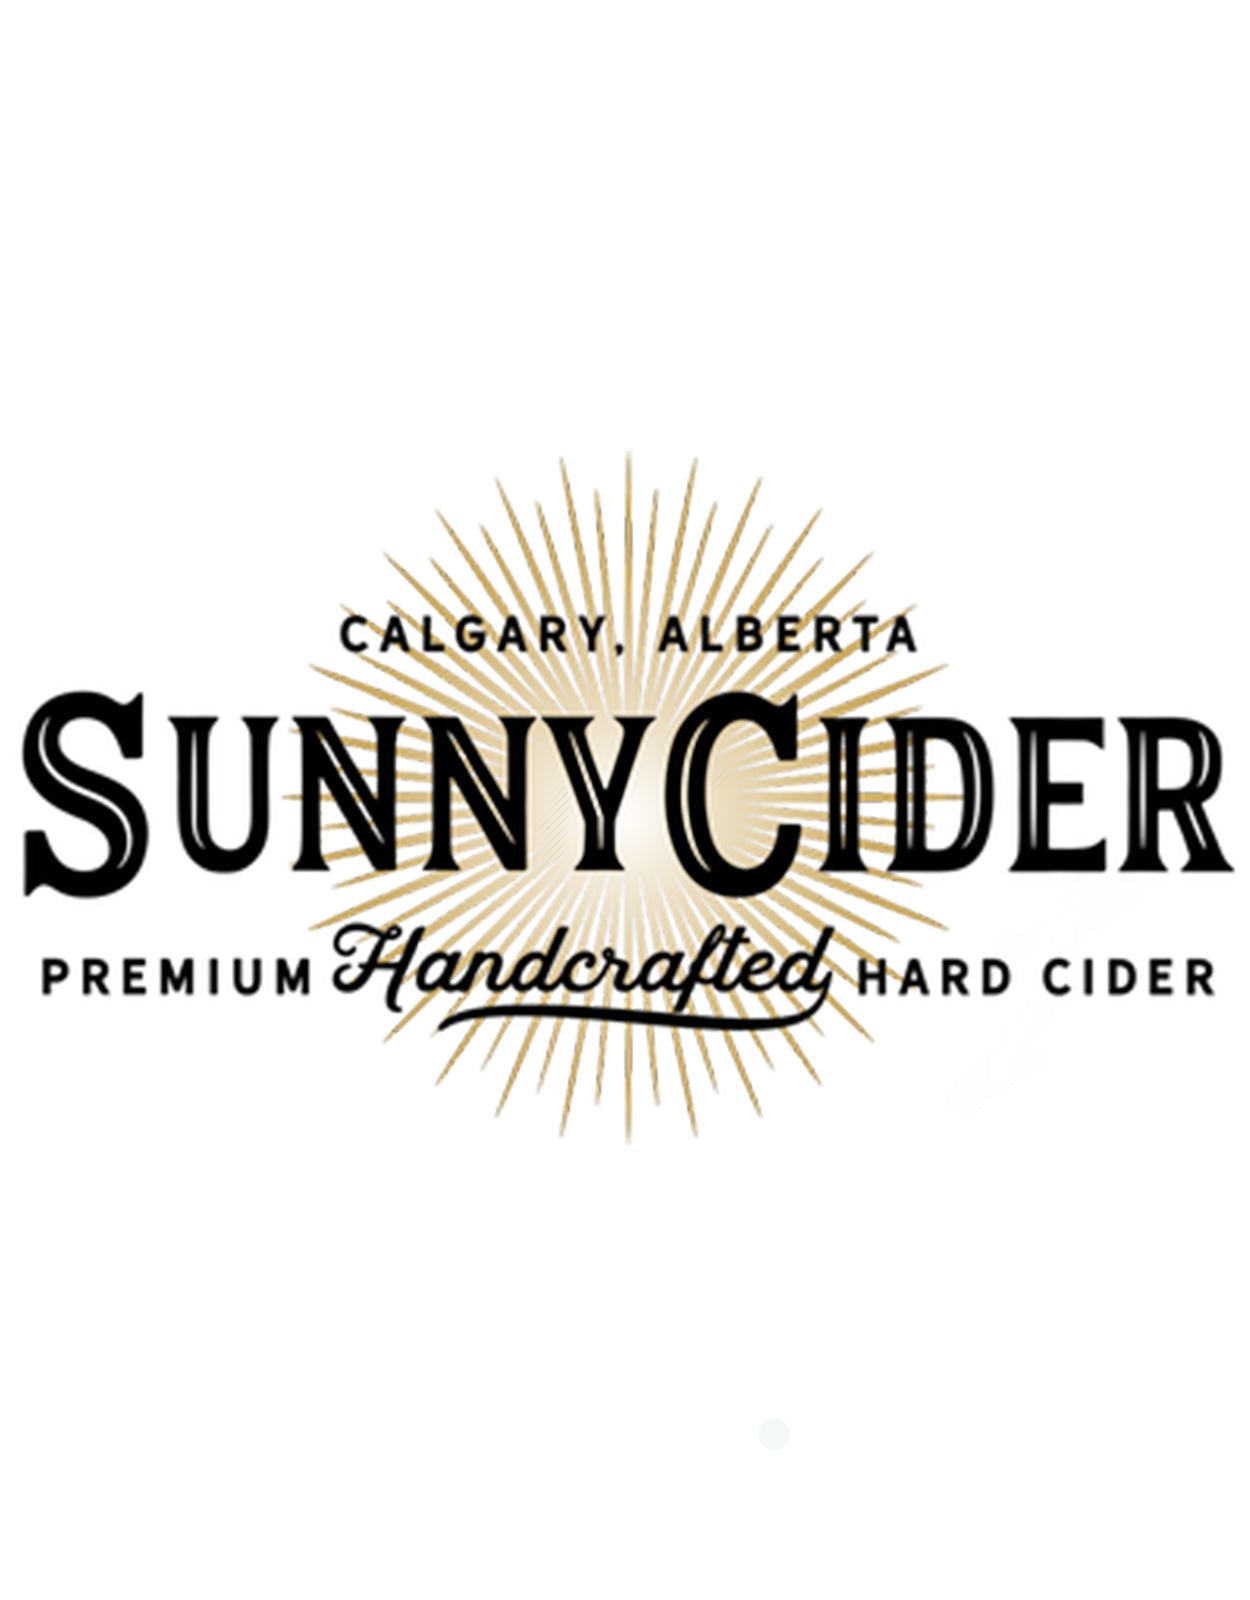 SunnyCider Mix Pack 473 ml - 4 Cans